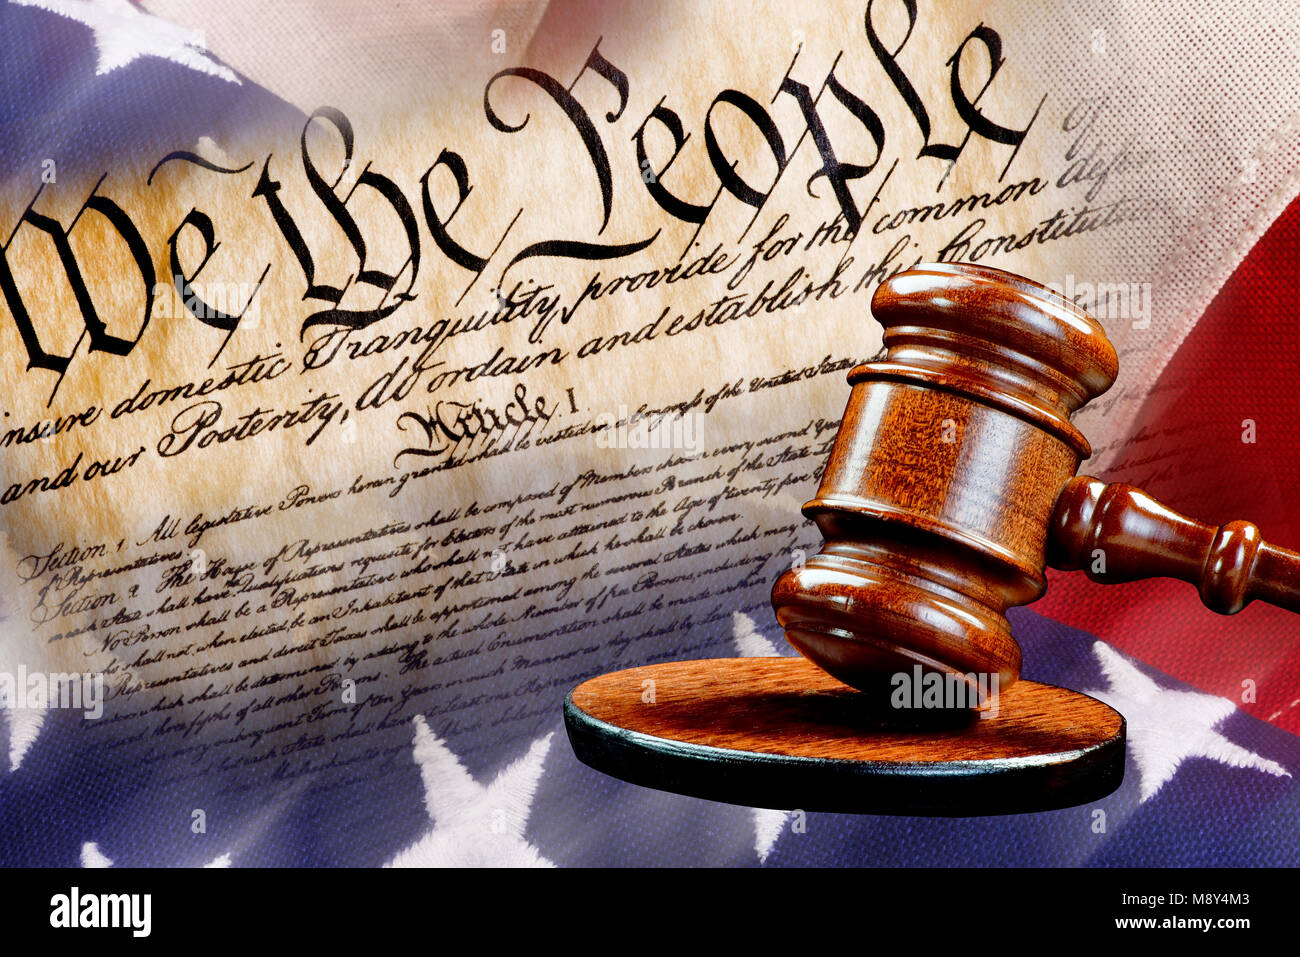 We the People with justice of the gavel. Stock Photo